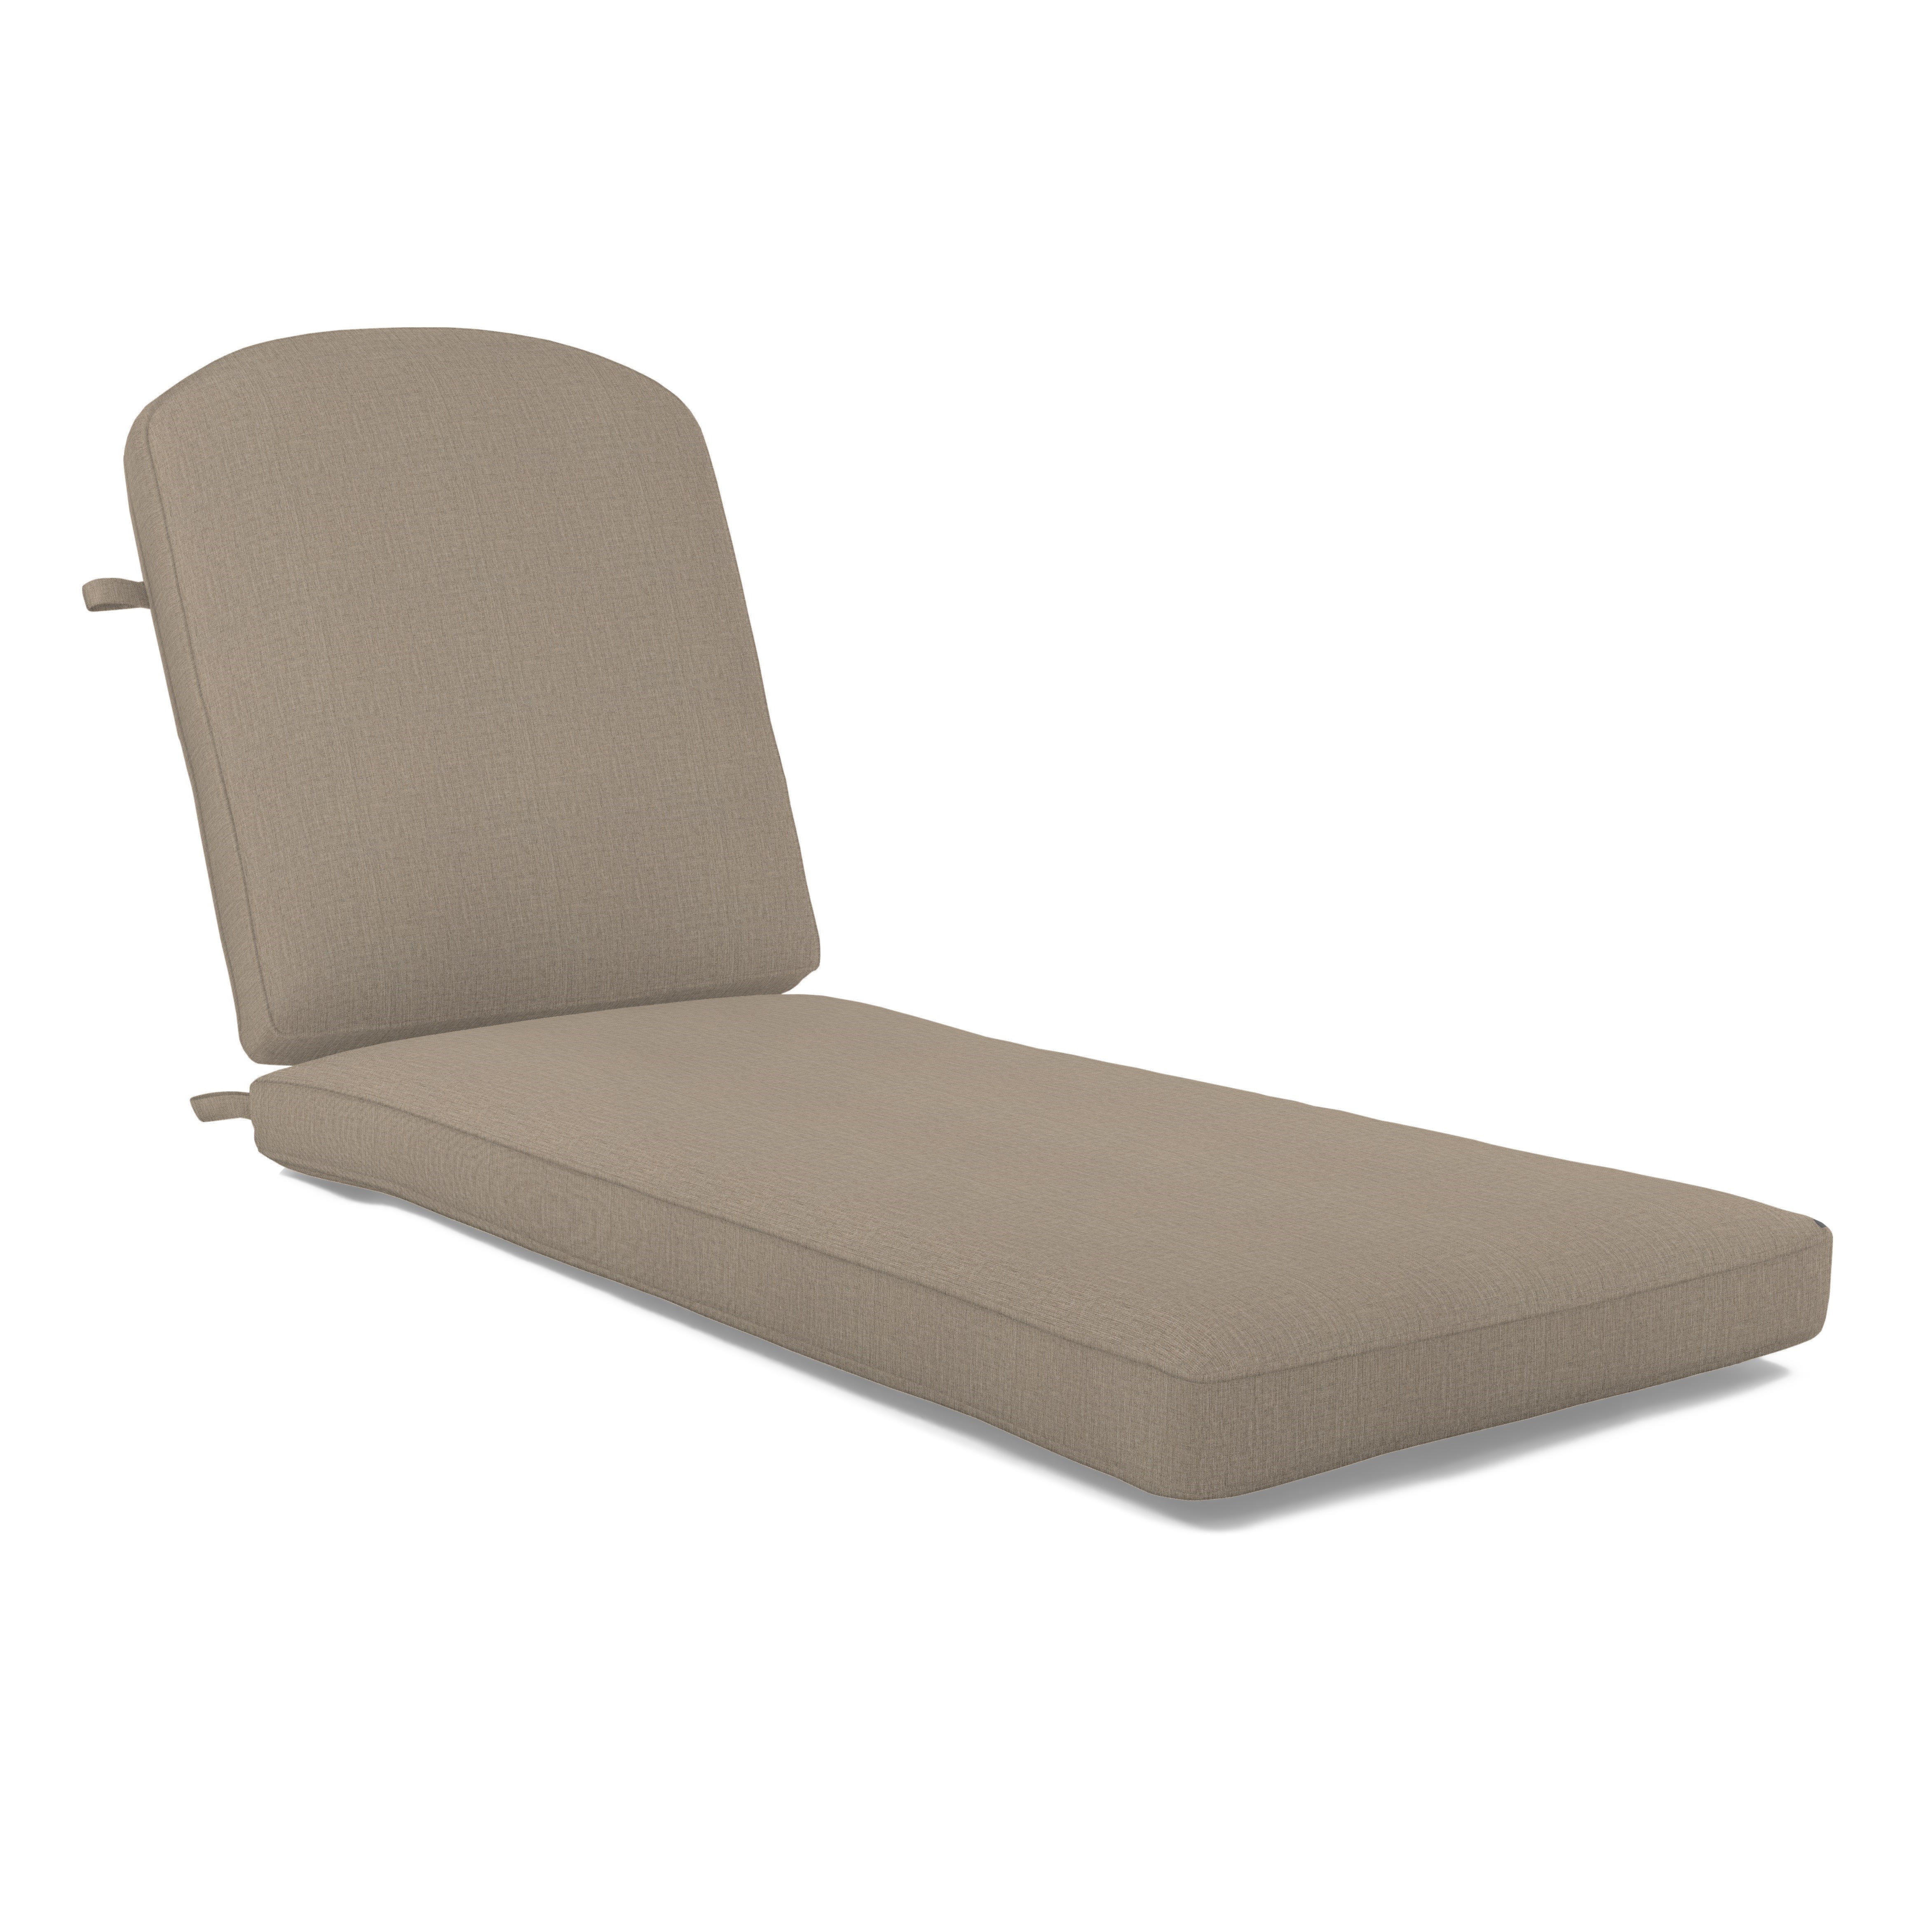 cast ash water resistant chaise cushion product image